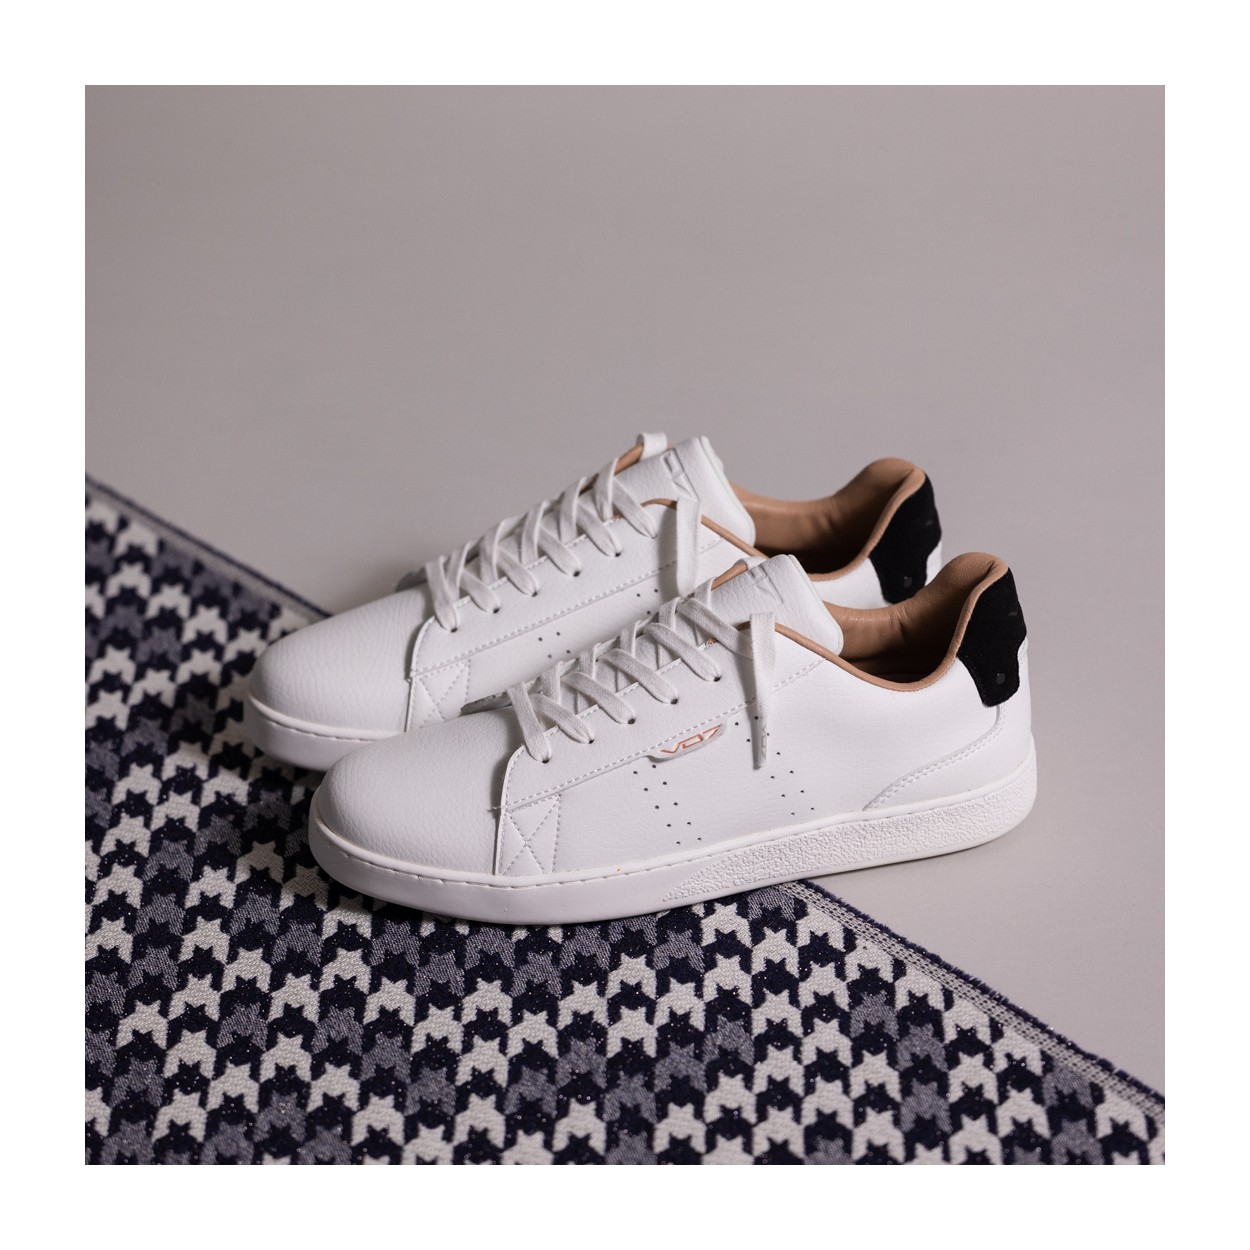 Sneakers VO7 Aston White : Comfort and French style 100% guaranteed